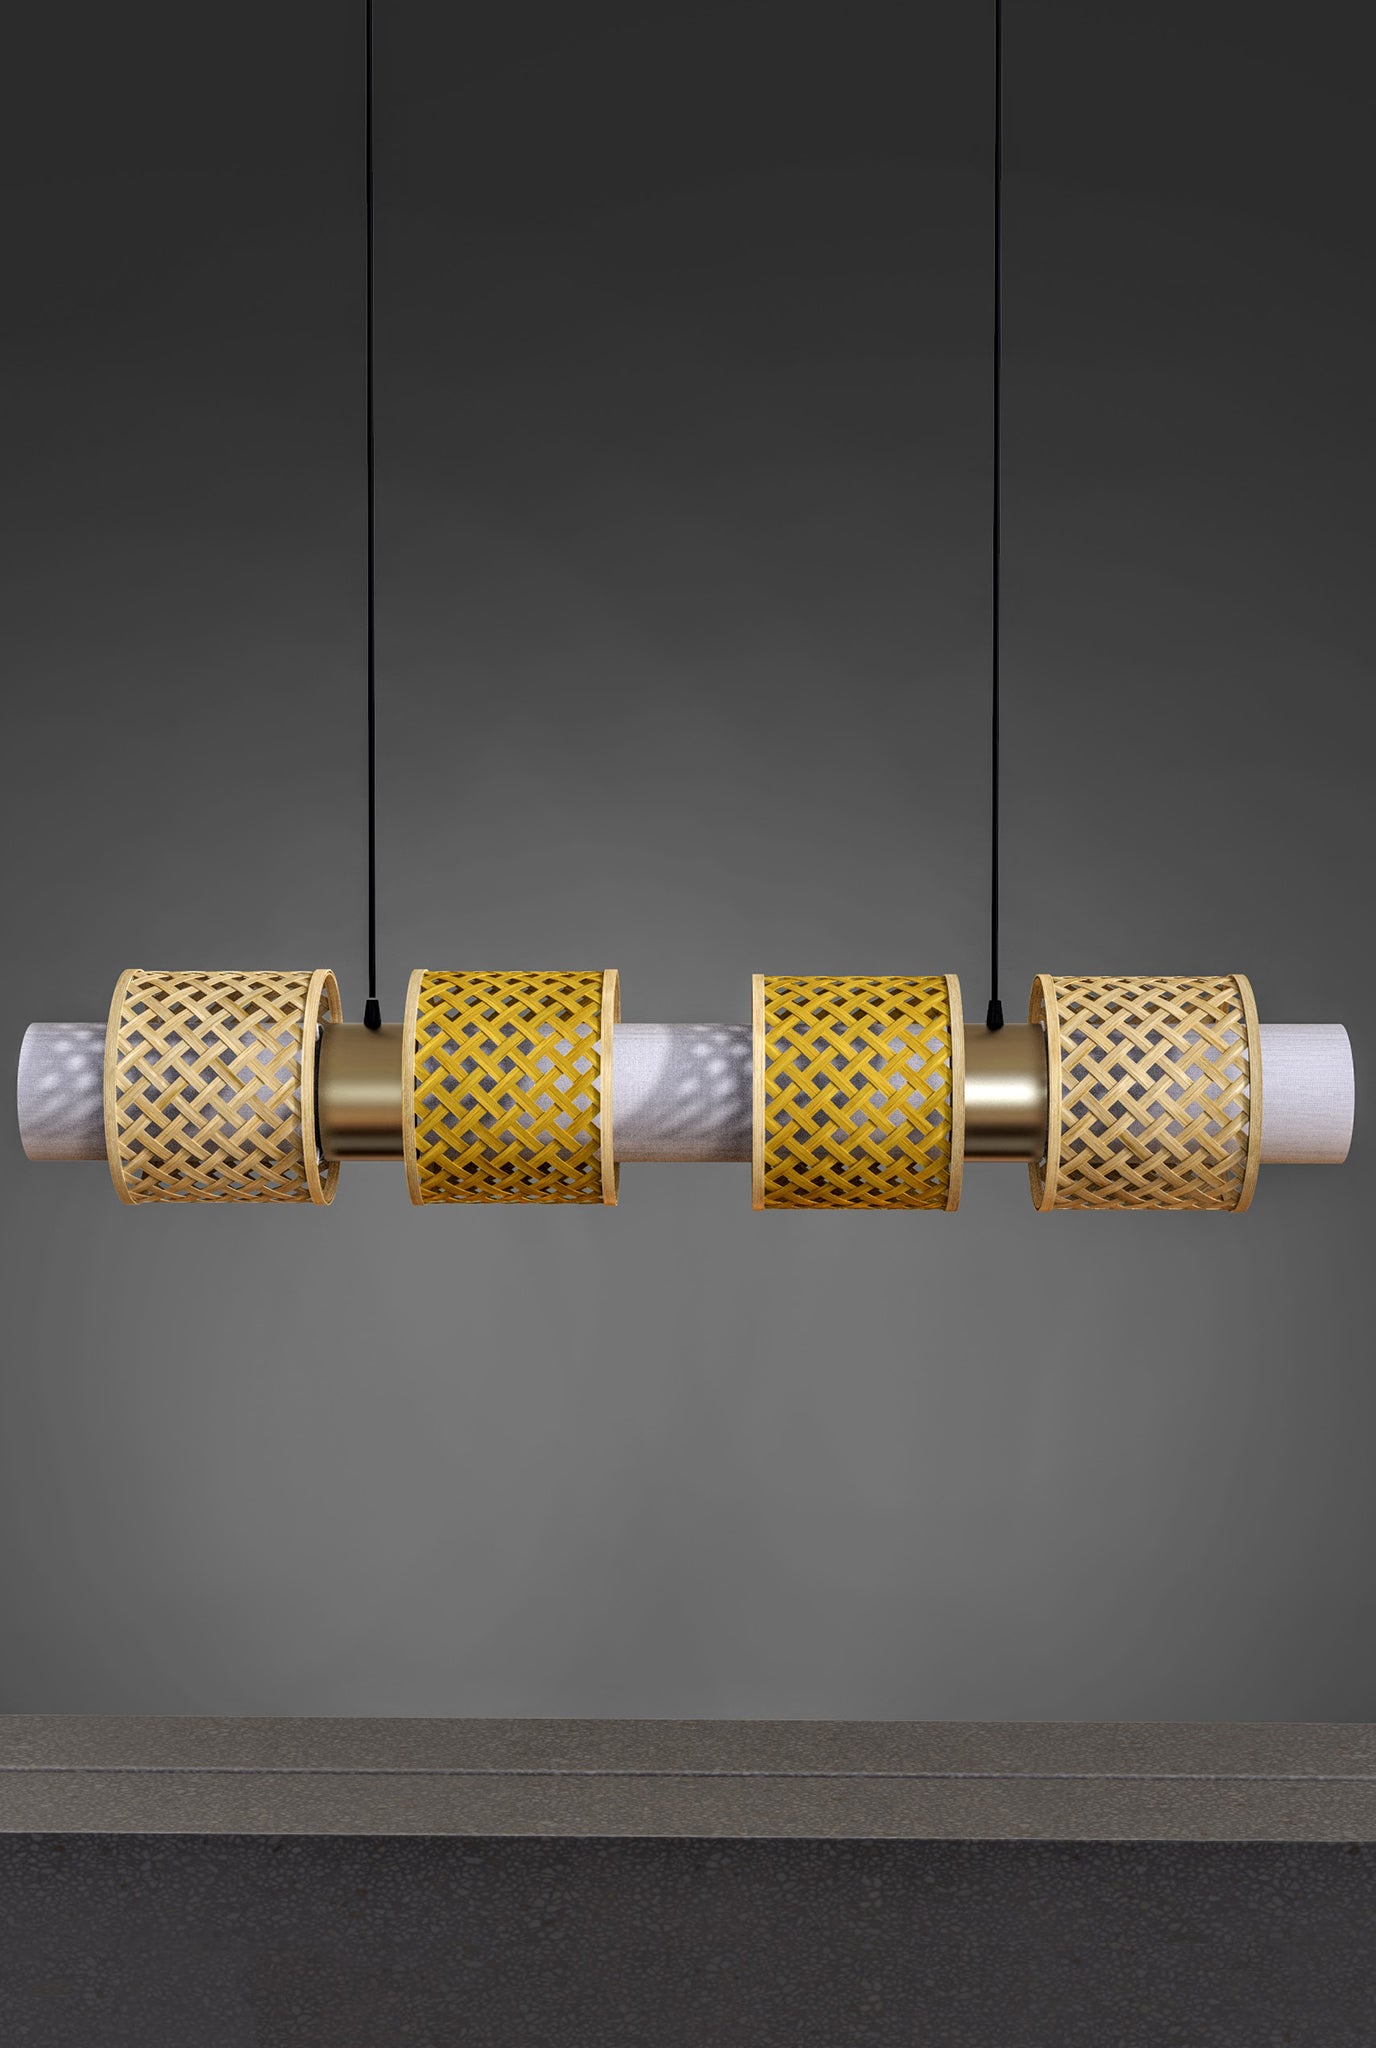 bamboo-lamp-handcrafted-pendant-lamp-lights